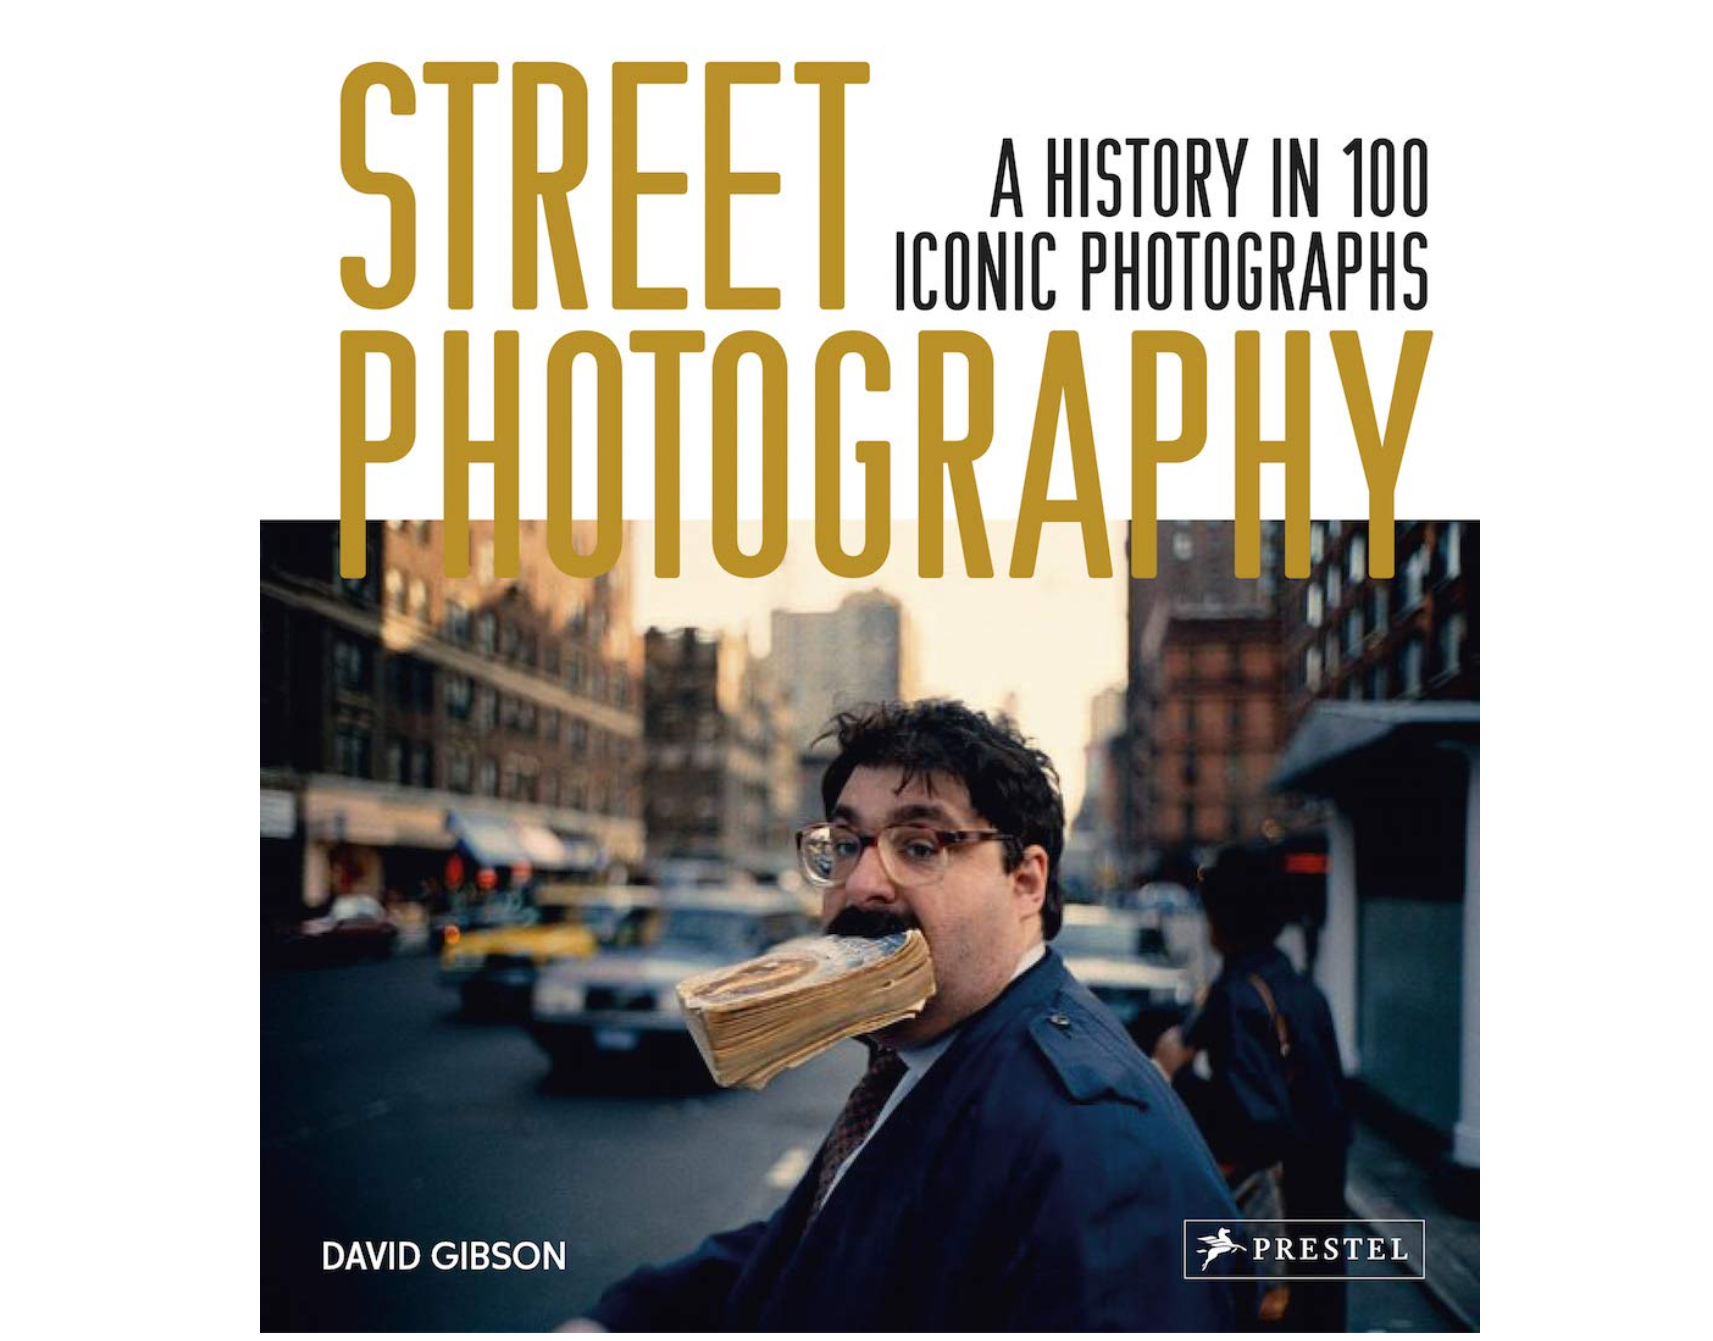 Learn About Photography Culture, Grow Skills With These Great Books